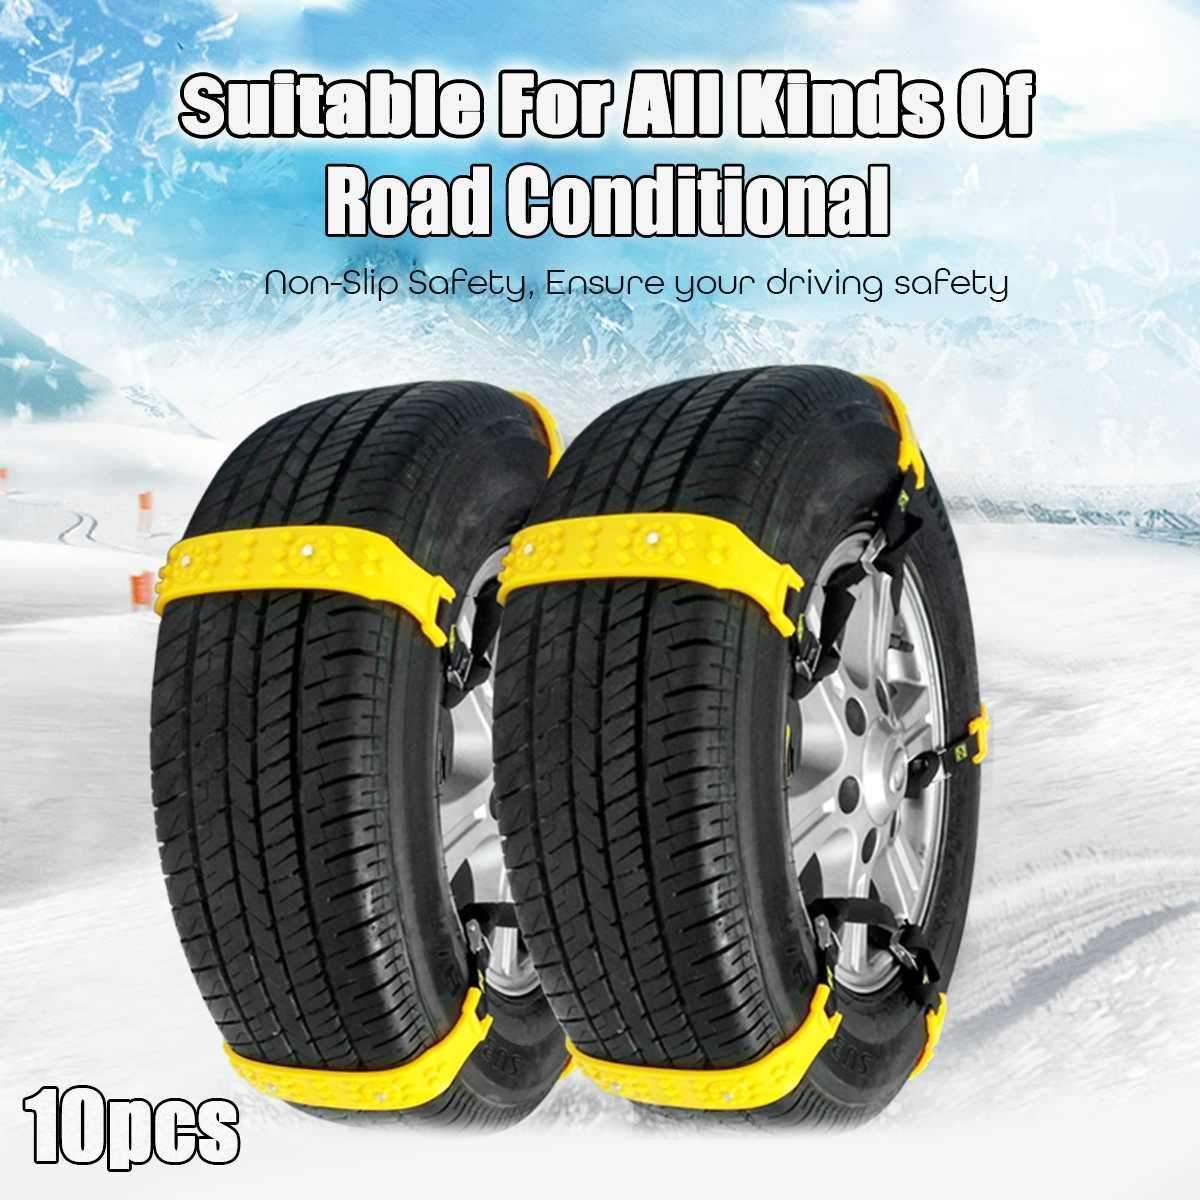 Planet+Gates+10pcs/Set+Car+Winter+Tyre+Snow+Chains+Roadway+Safety+Tire+Snow+Adjustable+Anti-skid+Safety+Double+Snap+Skid+Wheel+TPU+Chains